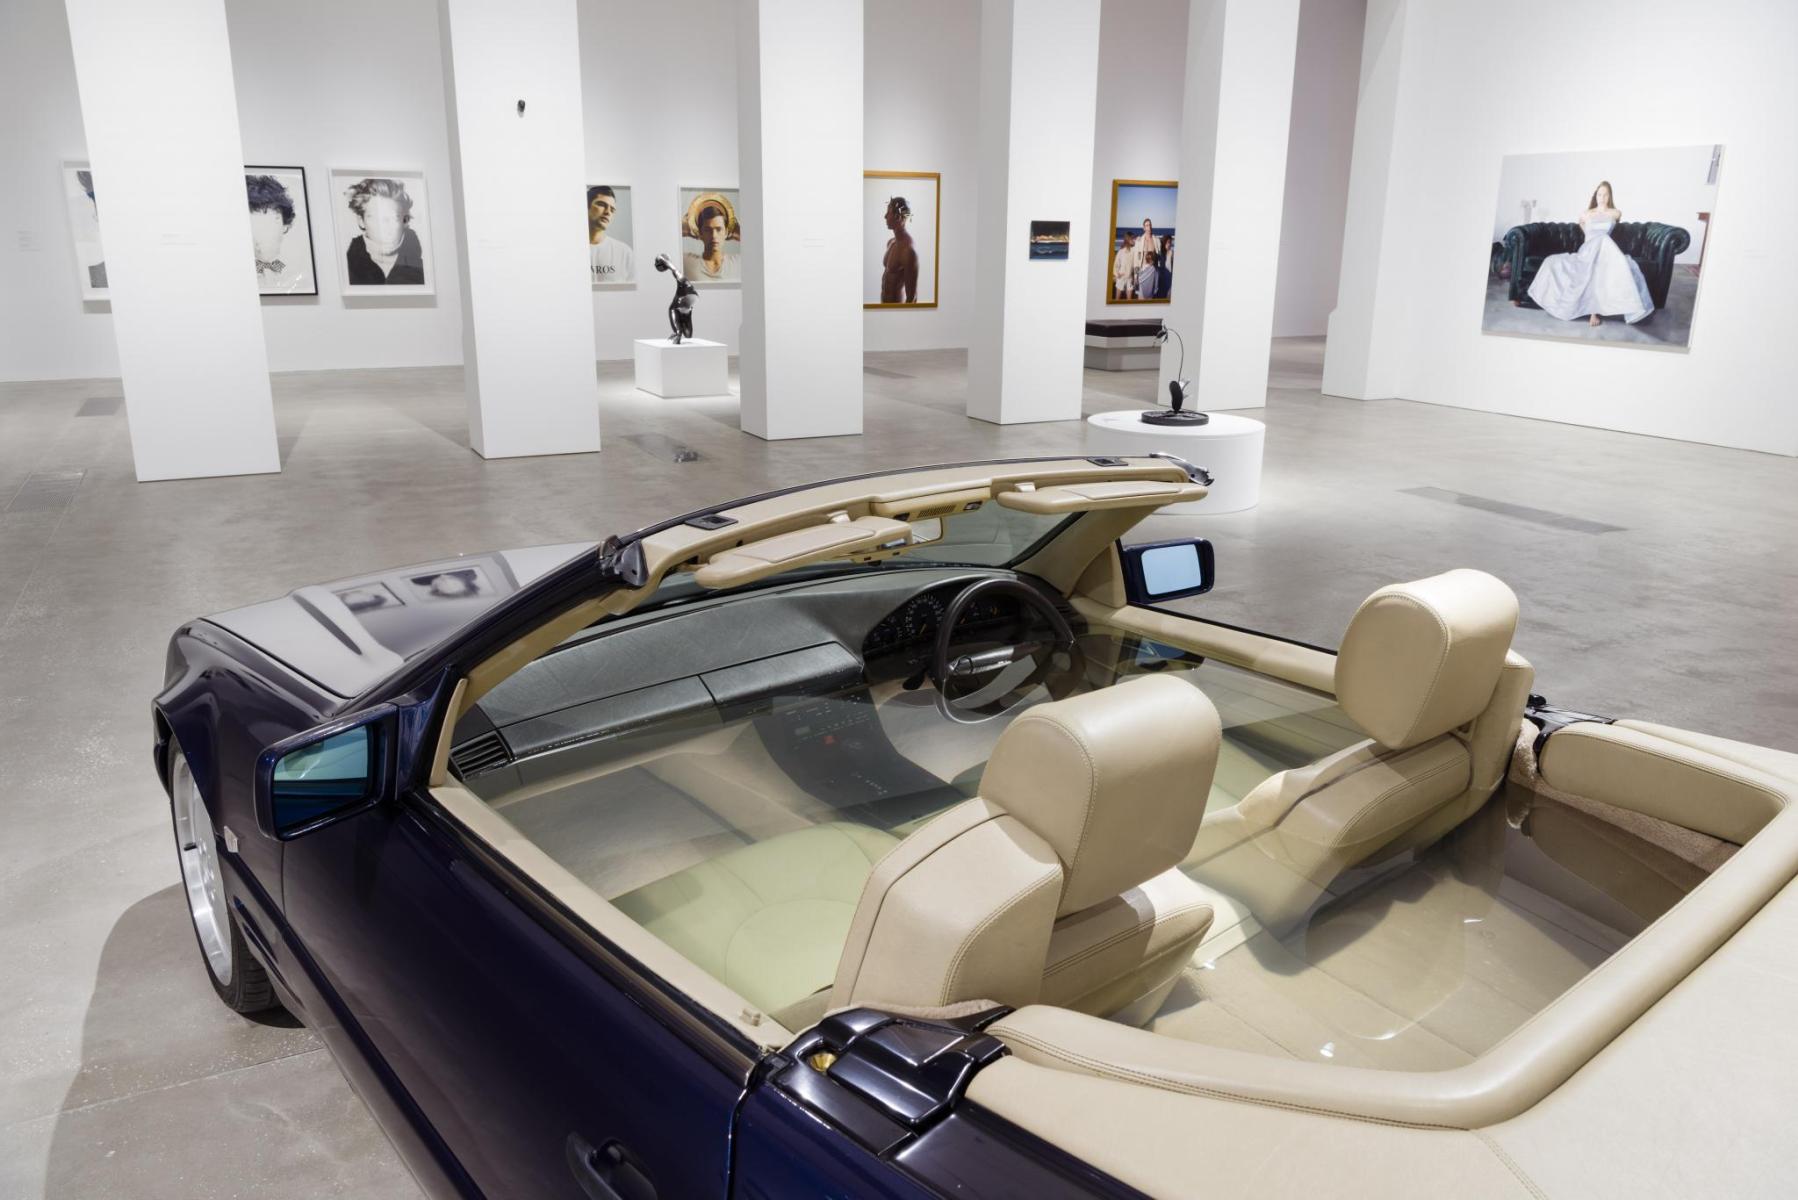 A car filled with water is parked in a gallery; long white coloumns partially block painted portraits on the far wall